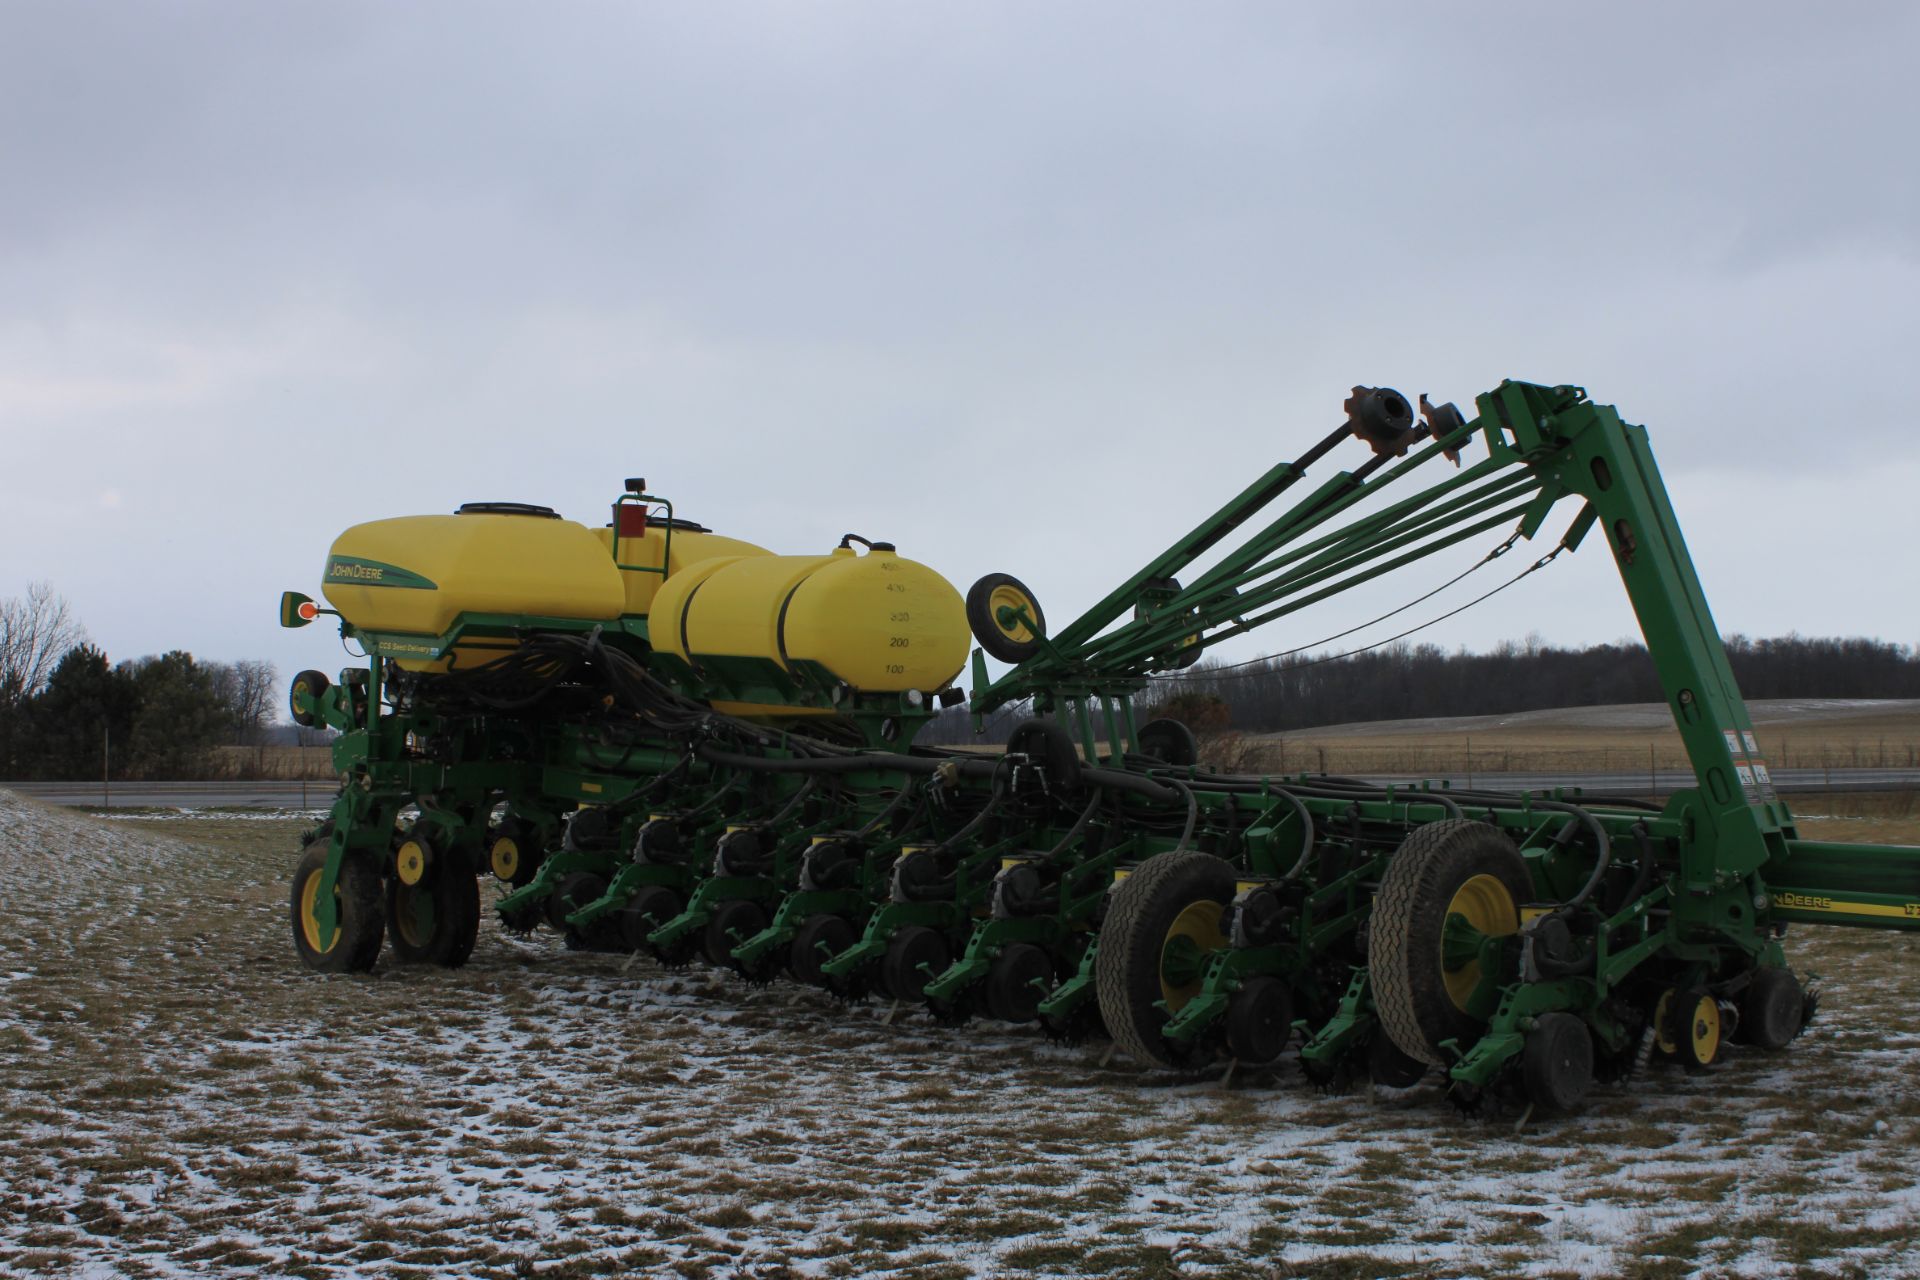 Planter 1770 (2013) - A01770CPDM755335 - 24 row 30"row spacing, active pneunamatic down force - Image 6 of 6